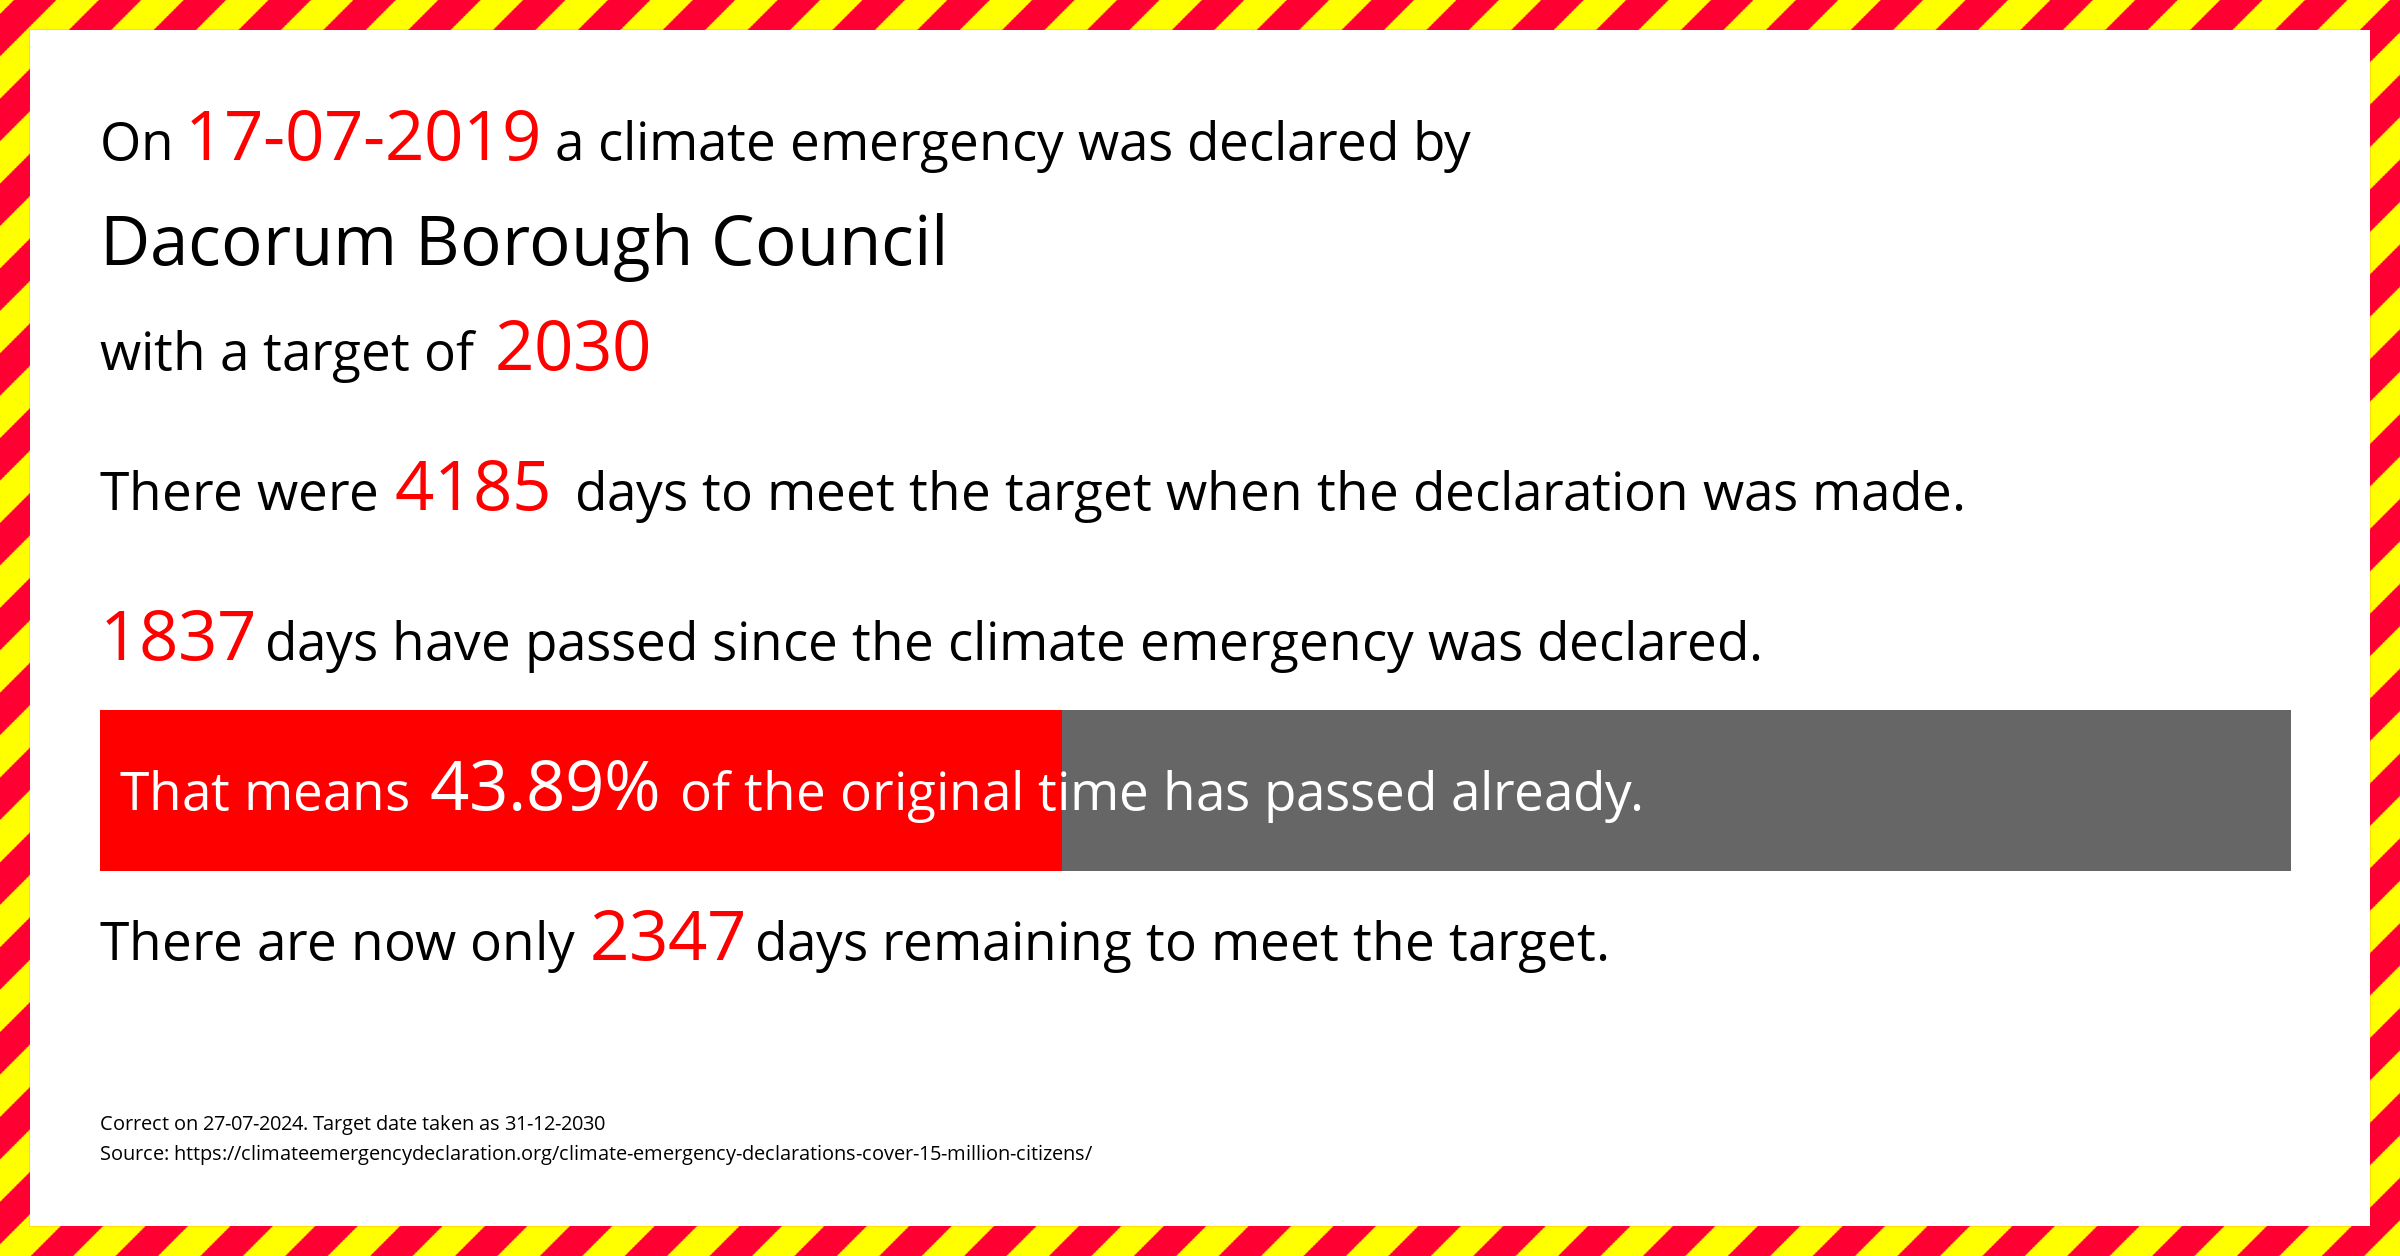 Dacorum Borough Council declared a Climate emergency on Wednesday 17th July 2019, with a target of 2030.